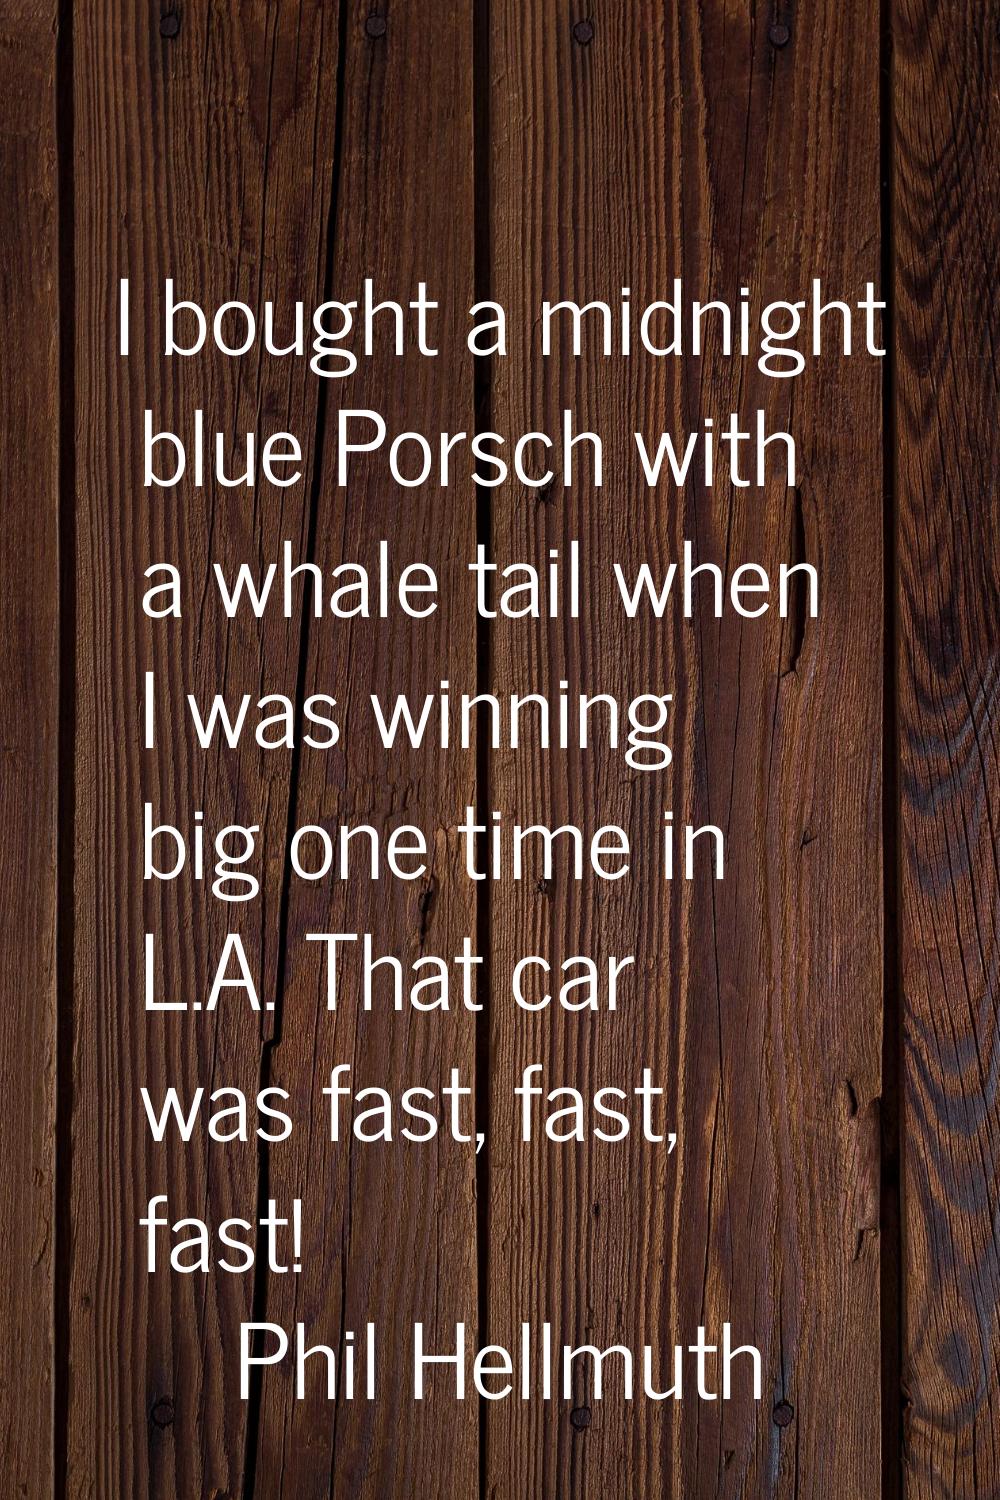 I bought a midnight blue Porsch with a whale tail when I was winning big one time in L.A. That car 